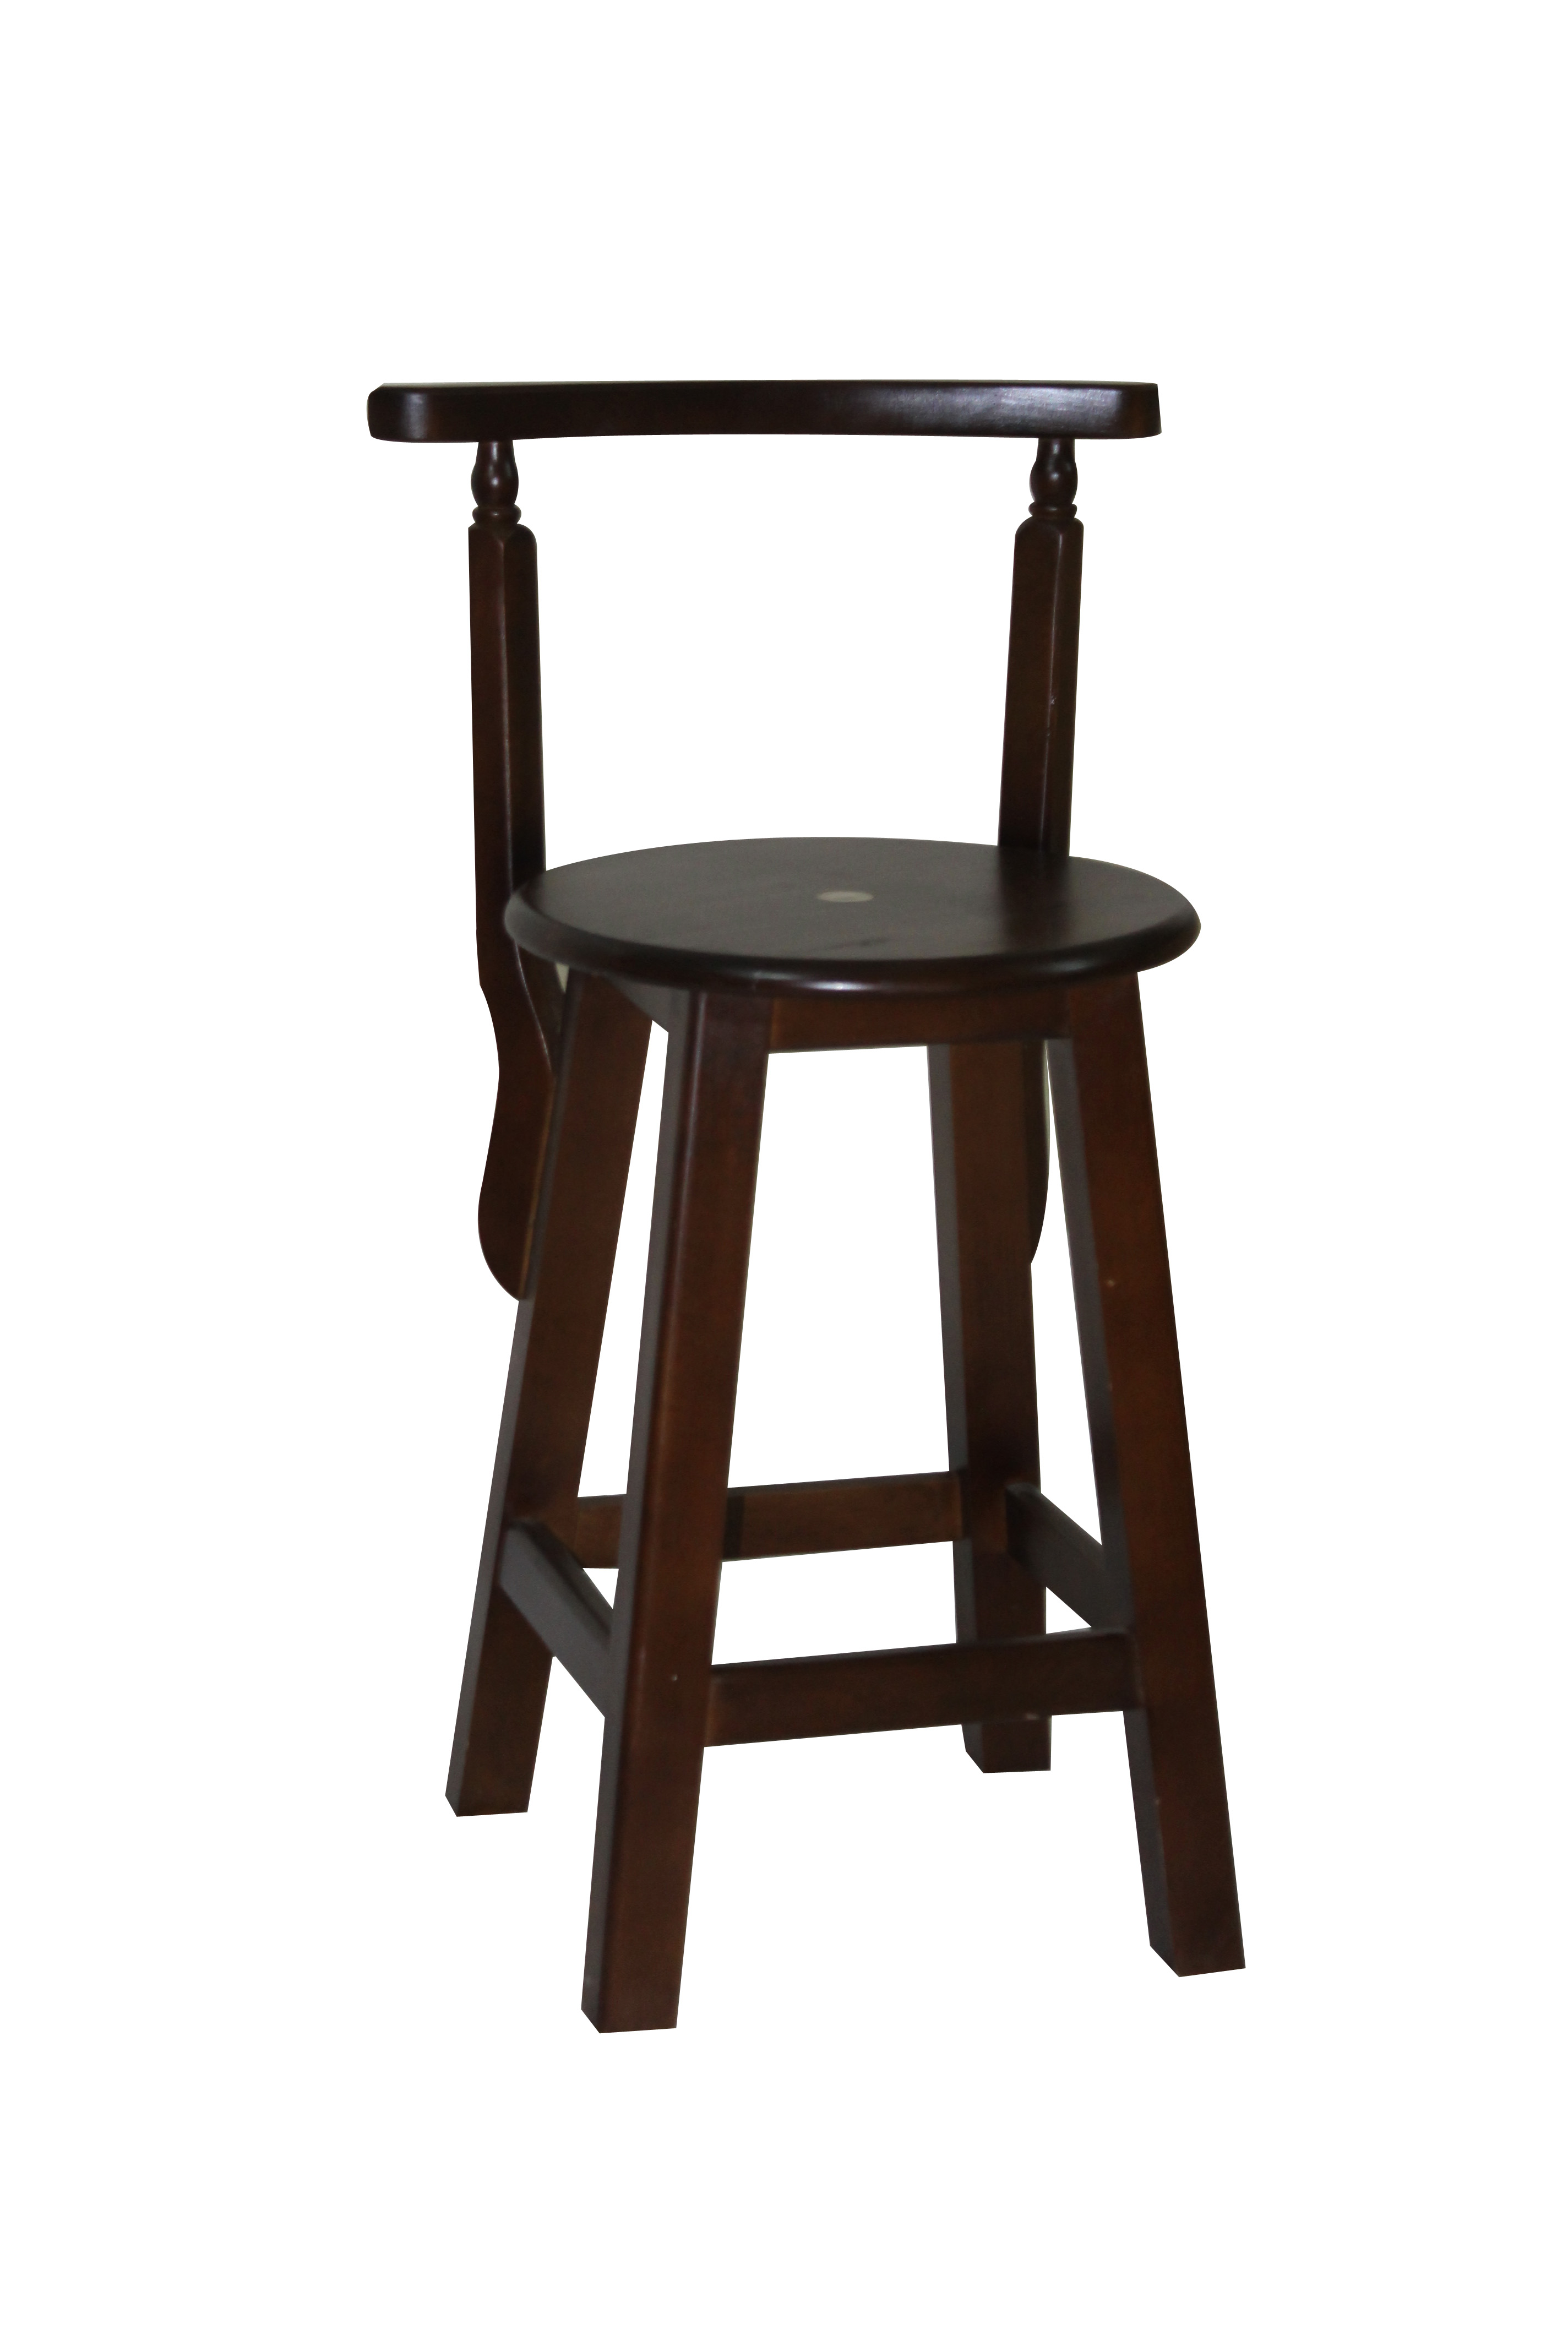 Brown chair with back - 50 cm